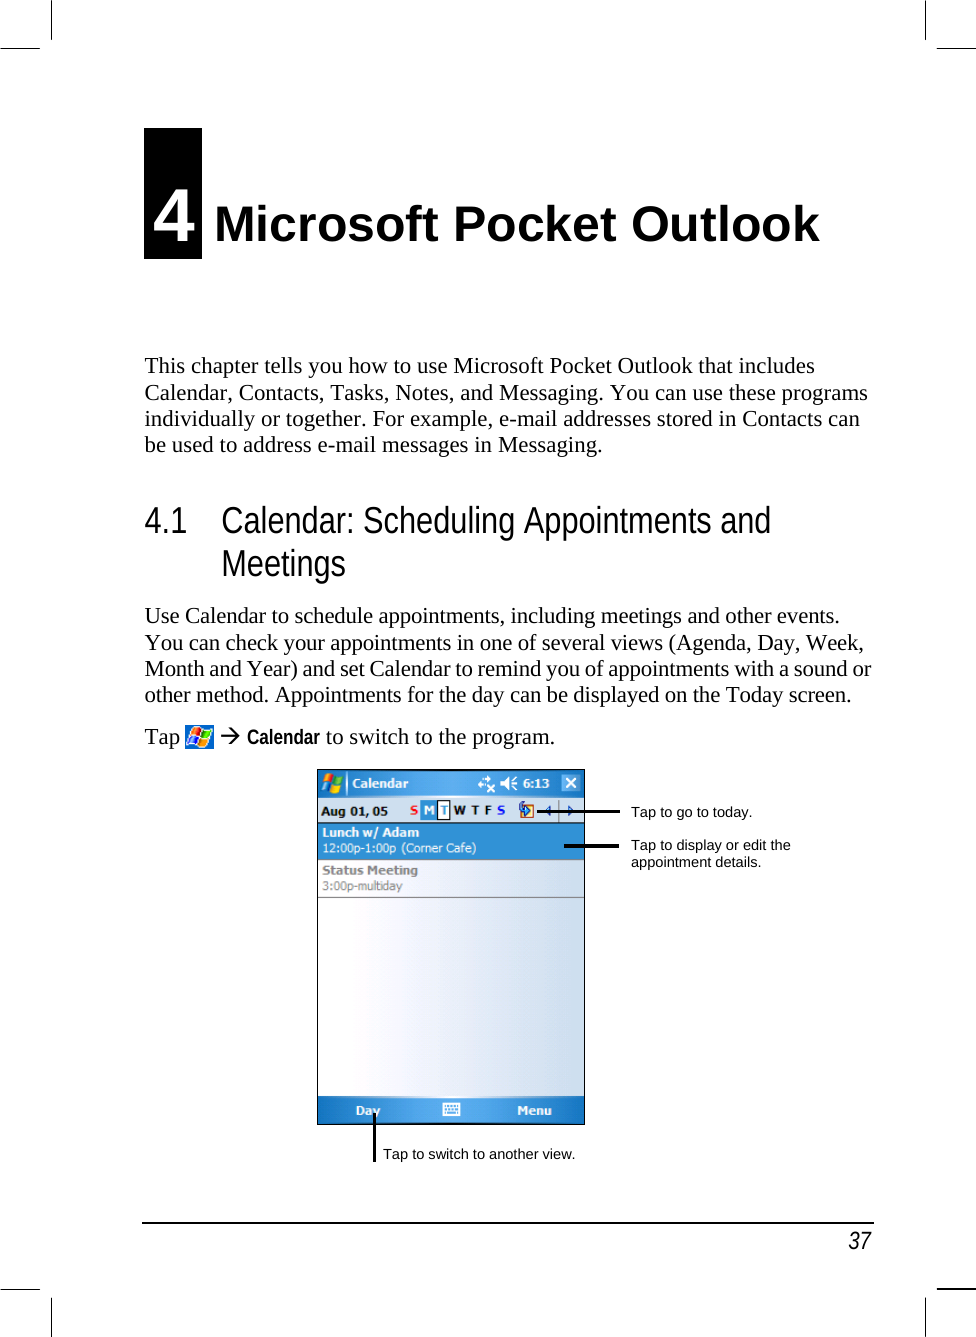   37 4 Microsoft Pocket Outlook This chapter tells you how to use Microsoft Pocket Outlook that includes Calendar, Contacts, Tasks, Notes, and Messaging. You can use these programs individually or together. For example, e-mail addresses stored in Contacts can be used to address e-mail messages in Messaging. 4.1  Calendar: Scheduling Appointments and Meetings Use Calendar to schedule appointments, including meetings and other events. You can check your appointments in one of several views (Agenda, Day, Week, Month and Year) and set Calendar to remind you of appointments with a sound or other method. Appointments for the day can be displayed on the Today screen. Tap   Calendar to switch to the program.             Tap to go to today. Tap to display or edit the appointment details. Tap to switch to another view.